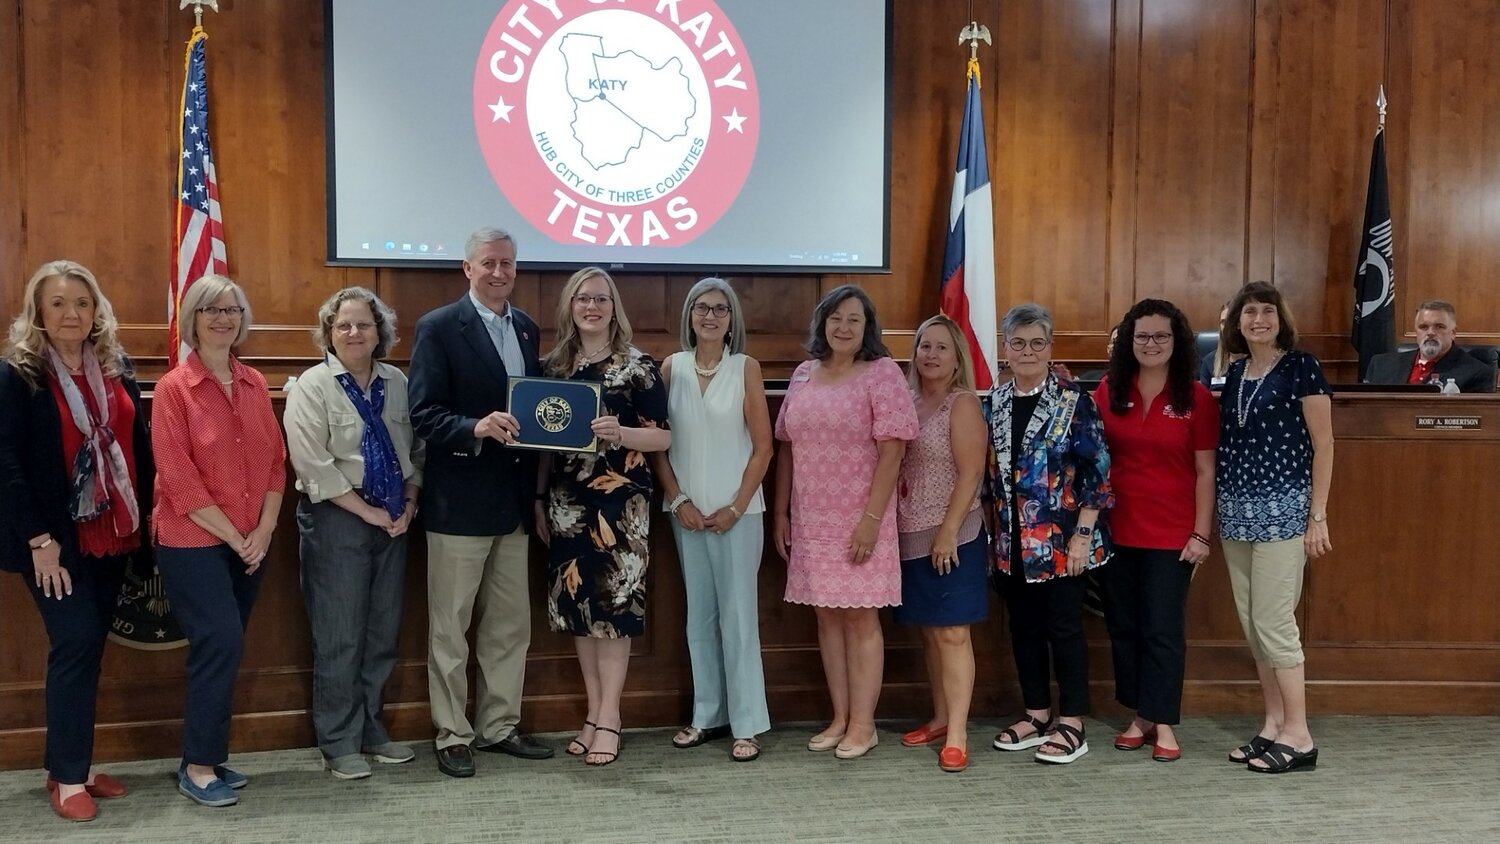 In commemoration of the 236th anniversary of the U.S. Constitution, members of the Katy Star of Destiny Chapter of the Daughters of the American Revolution received the Proclamation for Constitution Week, September 17-23, 2023 presented by Mayor Dusty Thiele at Monday’s City Council meeting. Pictured (left to right): Susan Stormer, Brenda Henning, Laurel Cull, Mayor Thiele, Katy Sheffield, Donna McGee, Stephanie Kinghorn, Jaime Pierce, Jan Vance, Kathy Smith and Claudia Stokes.